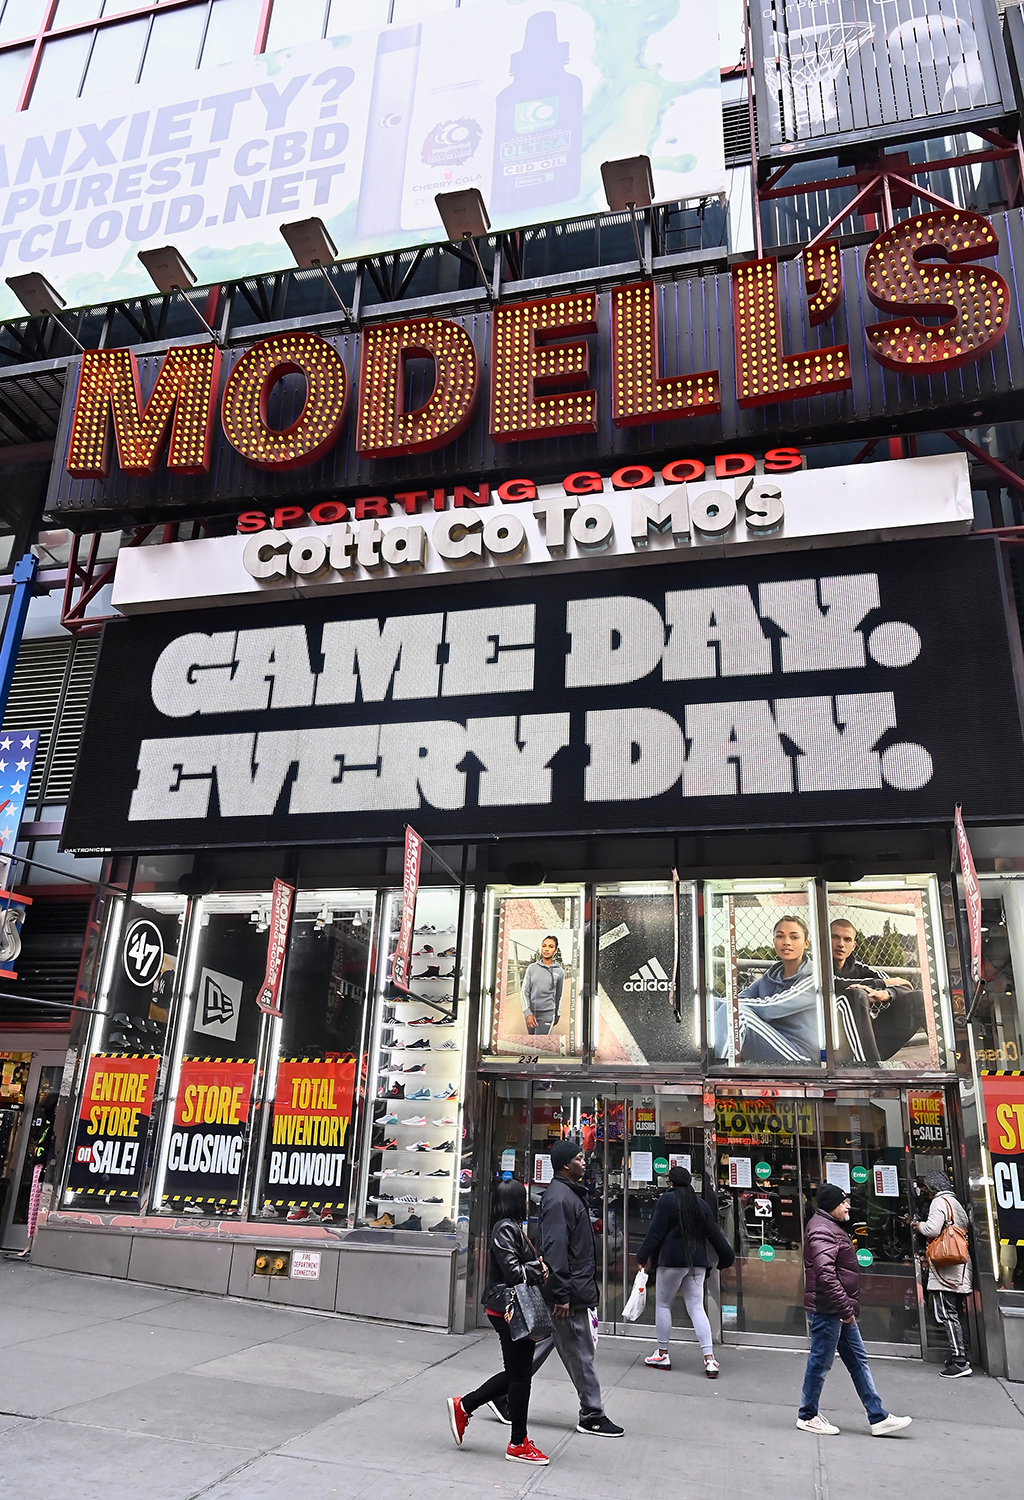 Modell's Sporting Goods files for bankruptcy and will close all stores